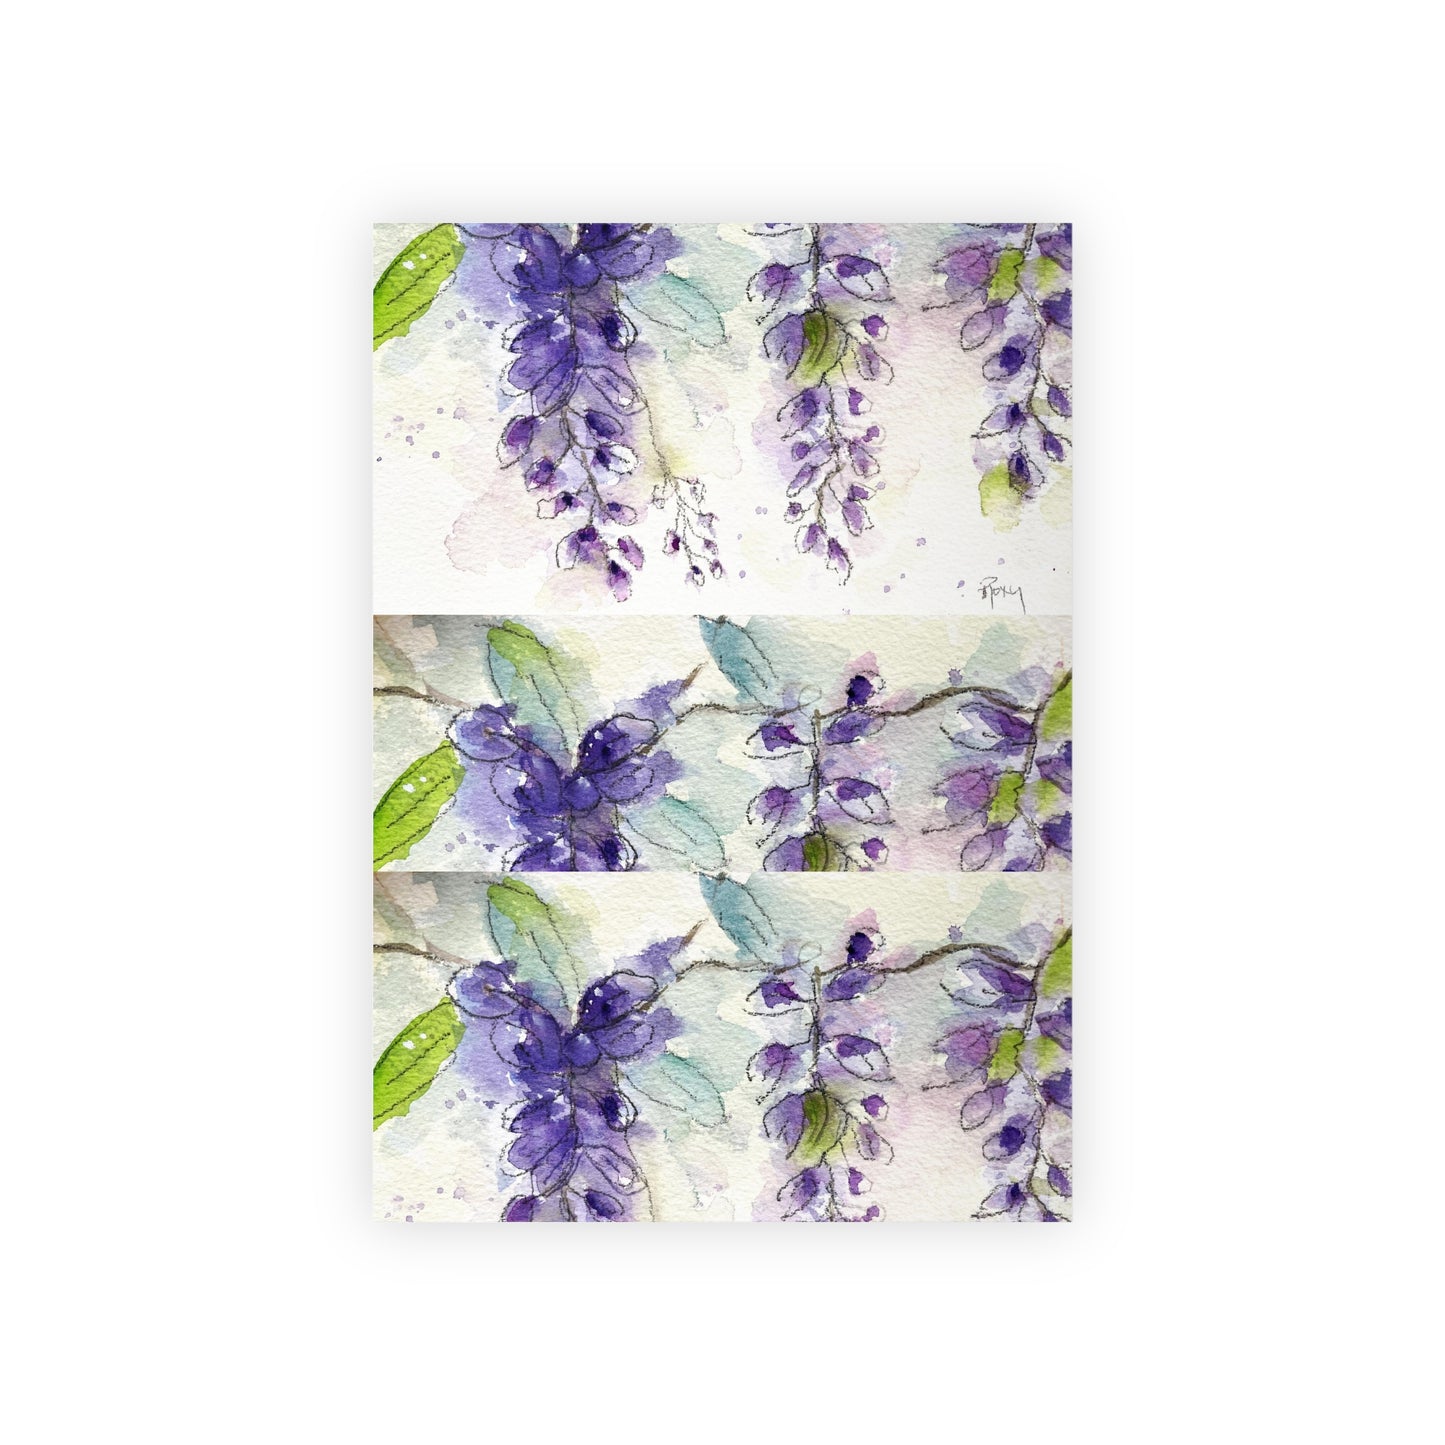 Roxy Rich Loose Floral Watercolor Wisteria painting printed Gift Wrapping Paper Rolls, 1pc Wedding Mom Friend giftwrap